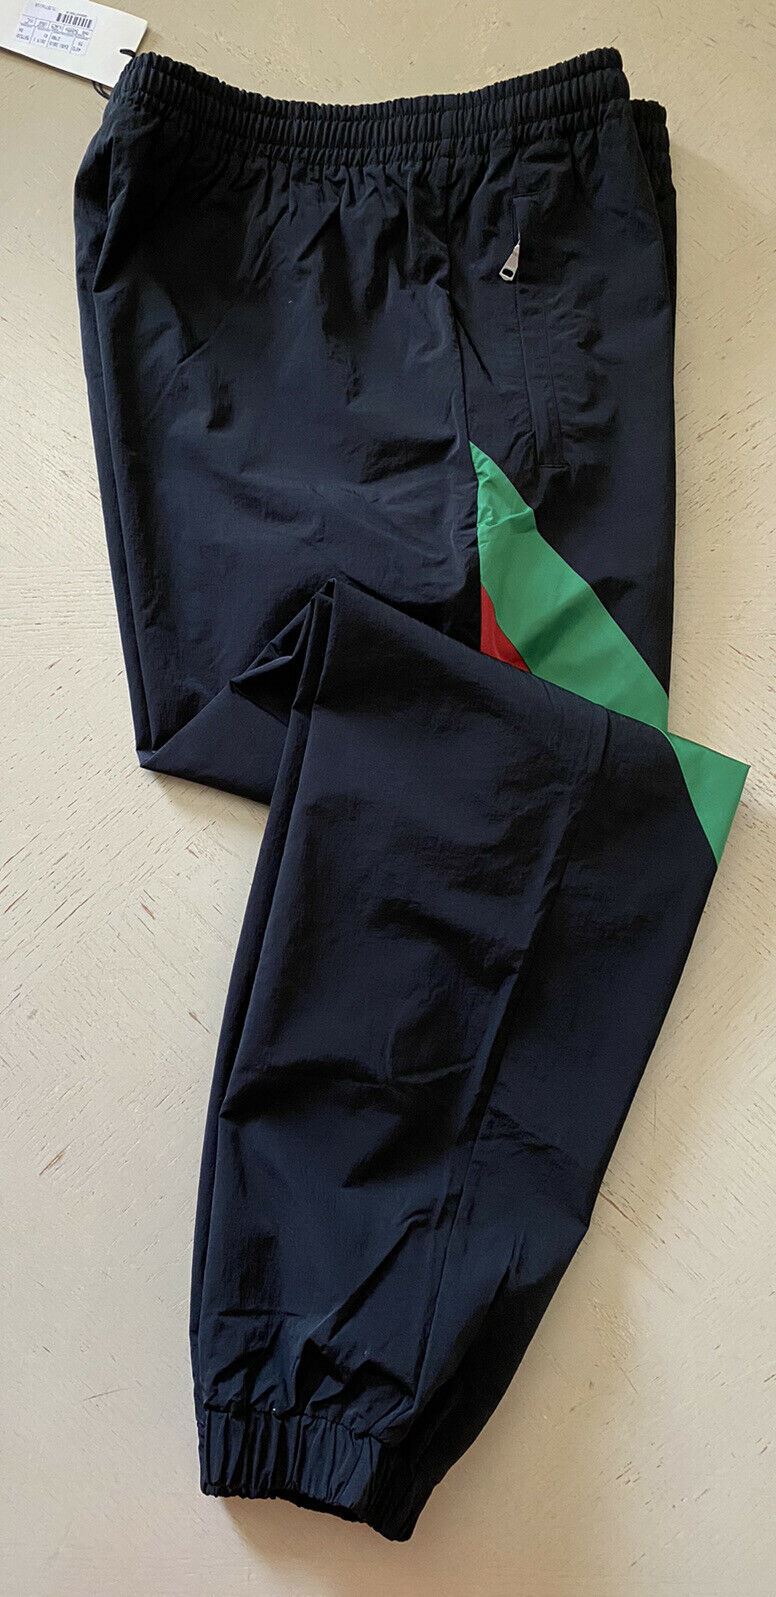 NWT Gucci  Men’s Joggers Pants Black/Green/Red Size XXL Italy